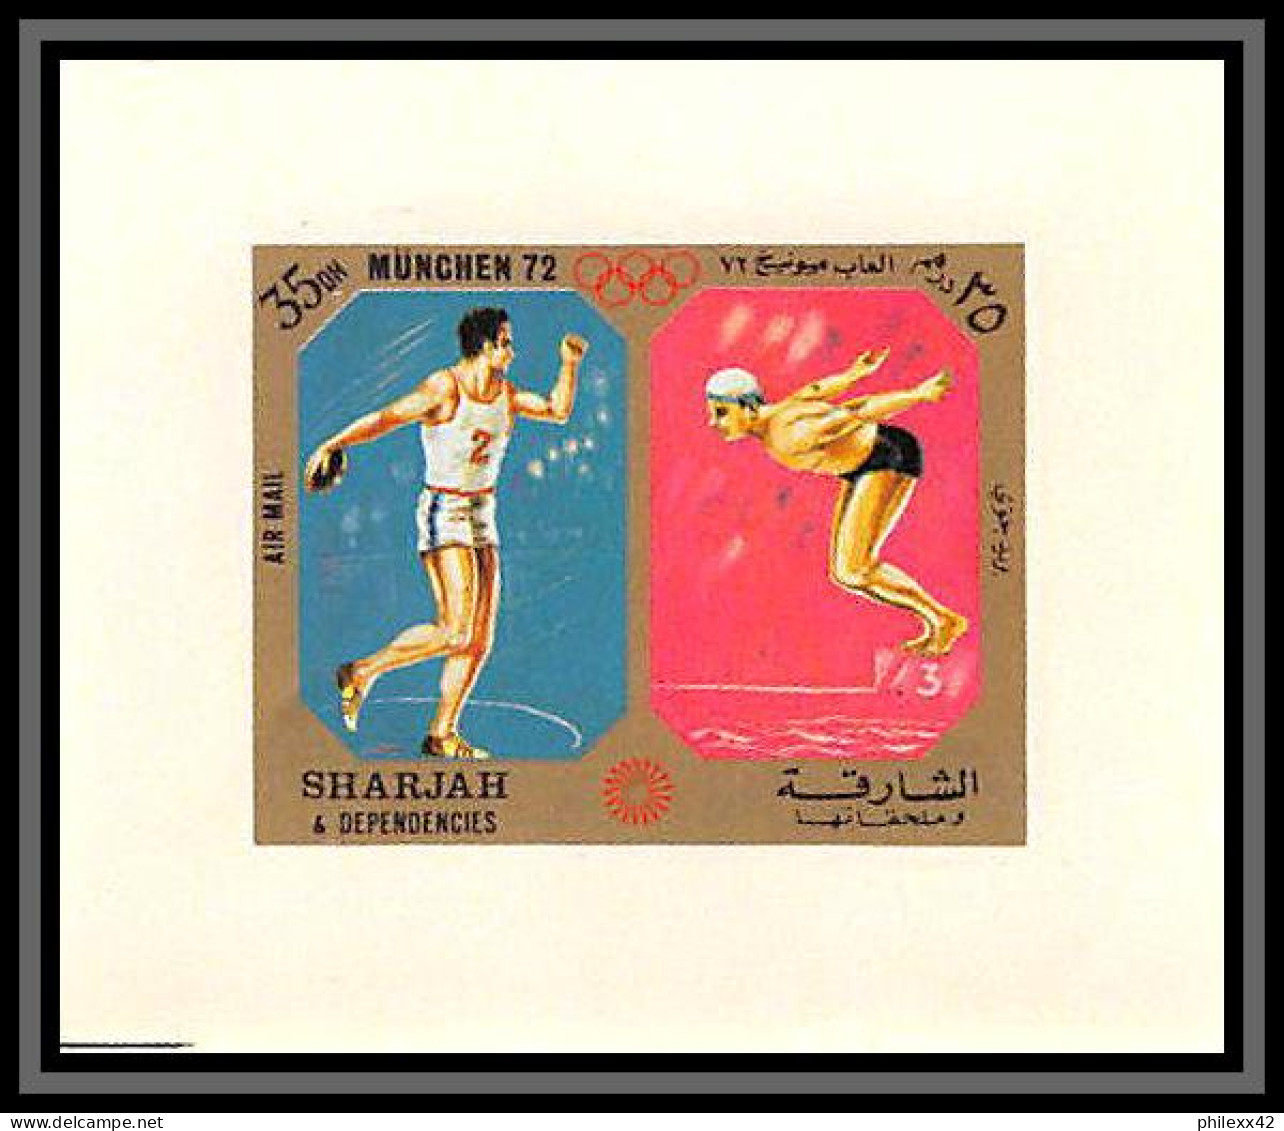 Sharjah - 2174/ N° 942/951 munich 1972 jeux olympiques (summer olympic games) deluxe neuf ** MNH